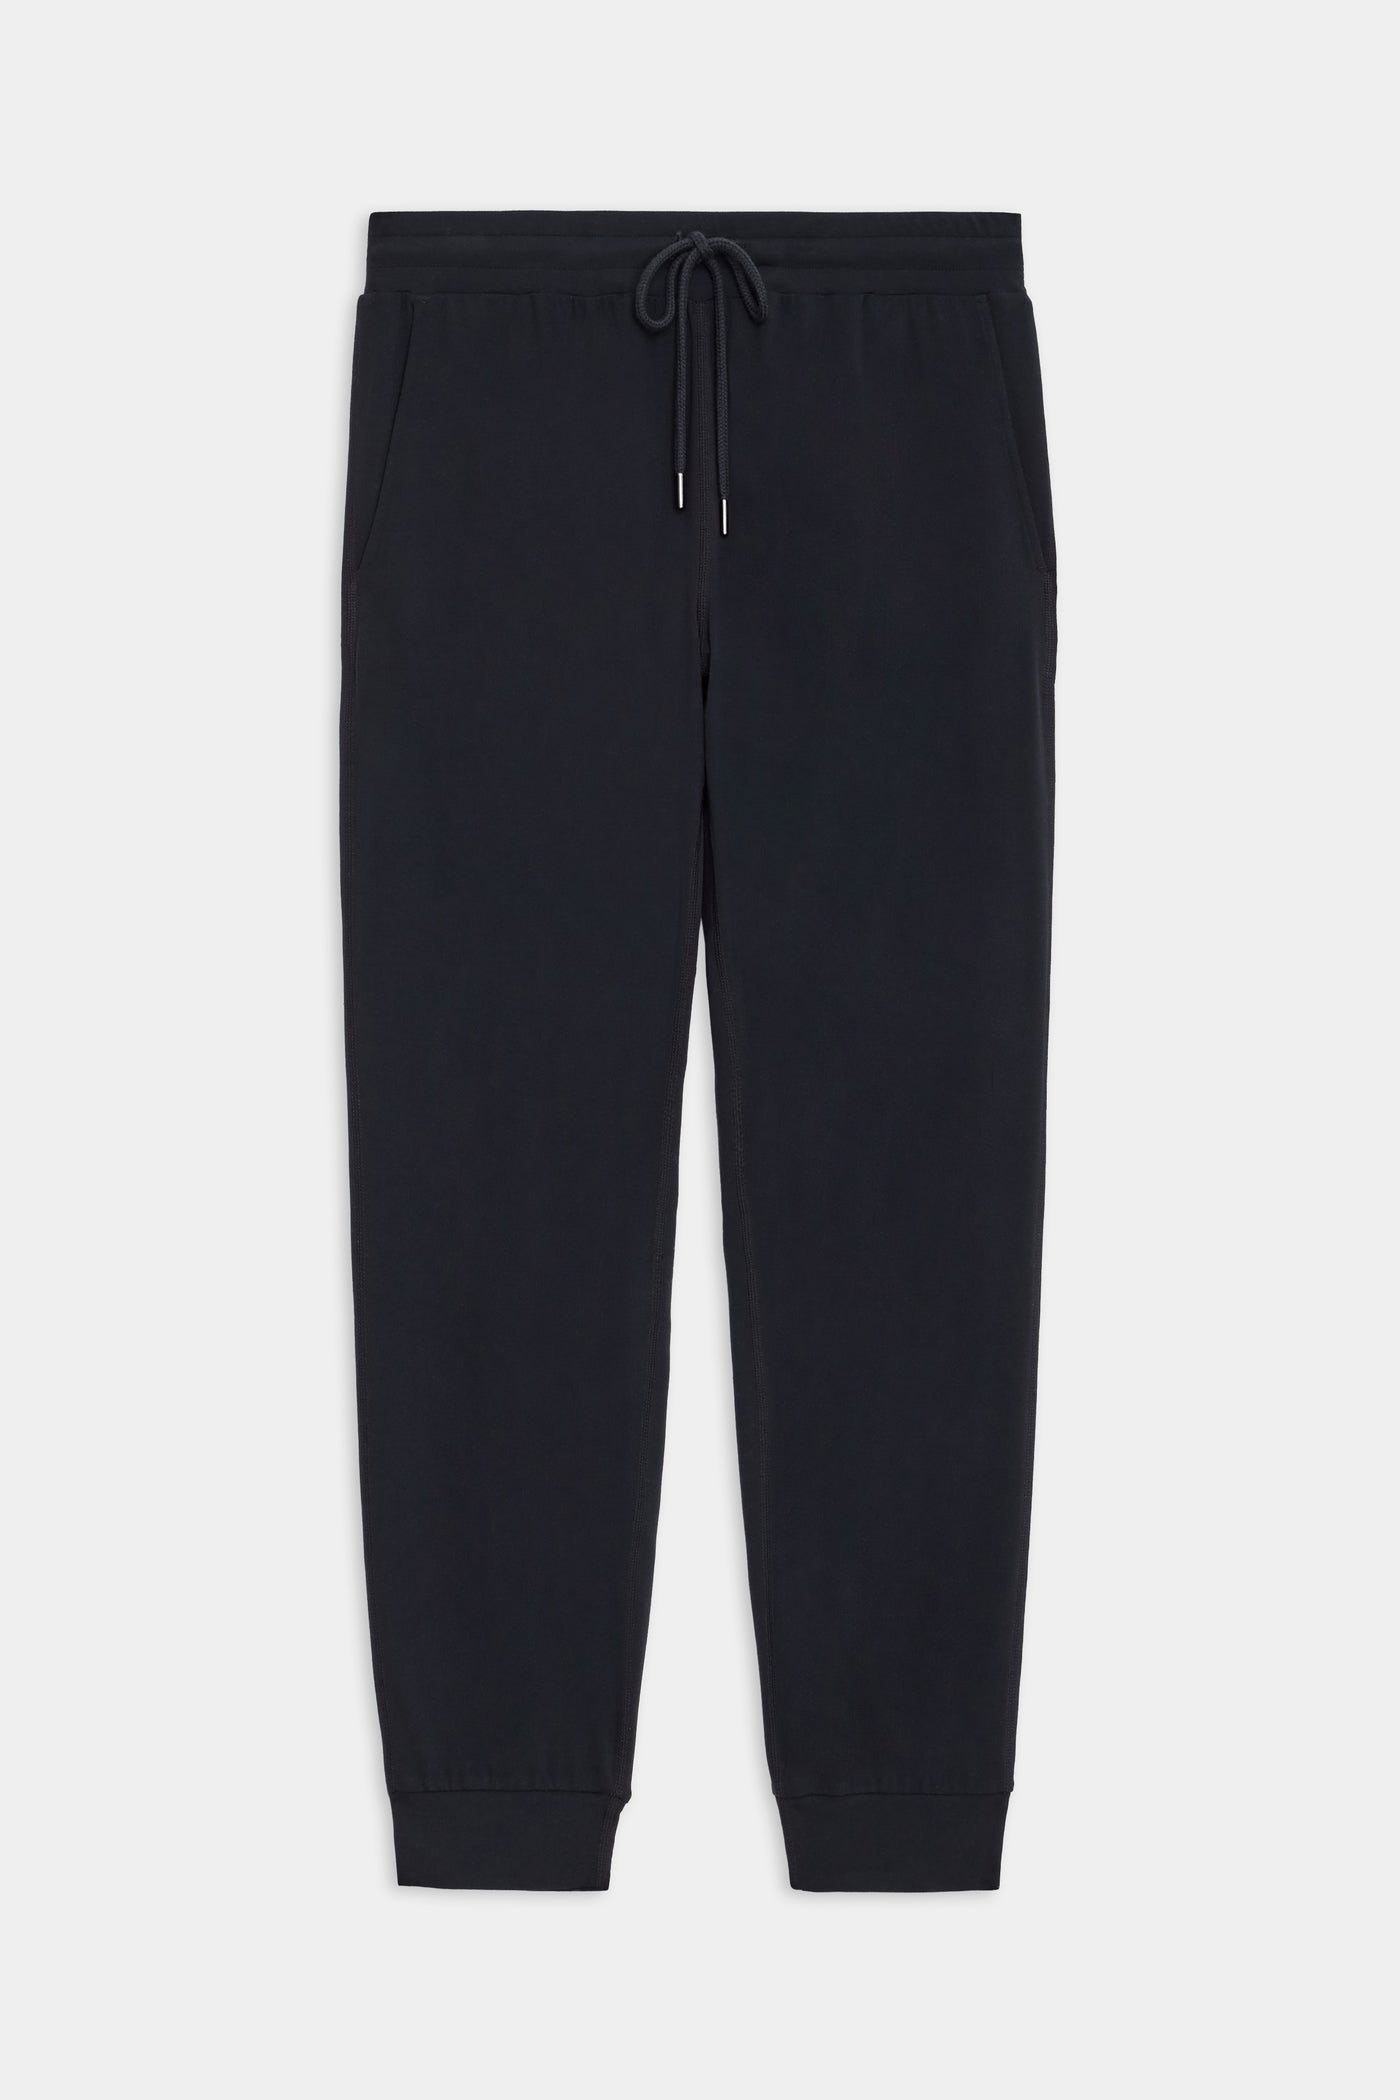 Classic AirWeight Jogger in Black